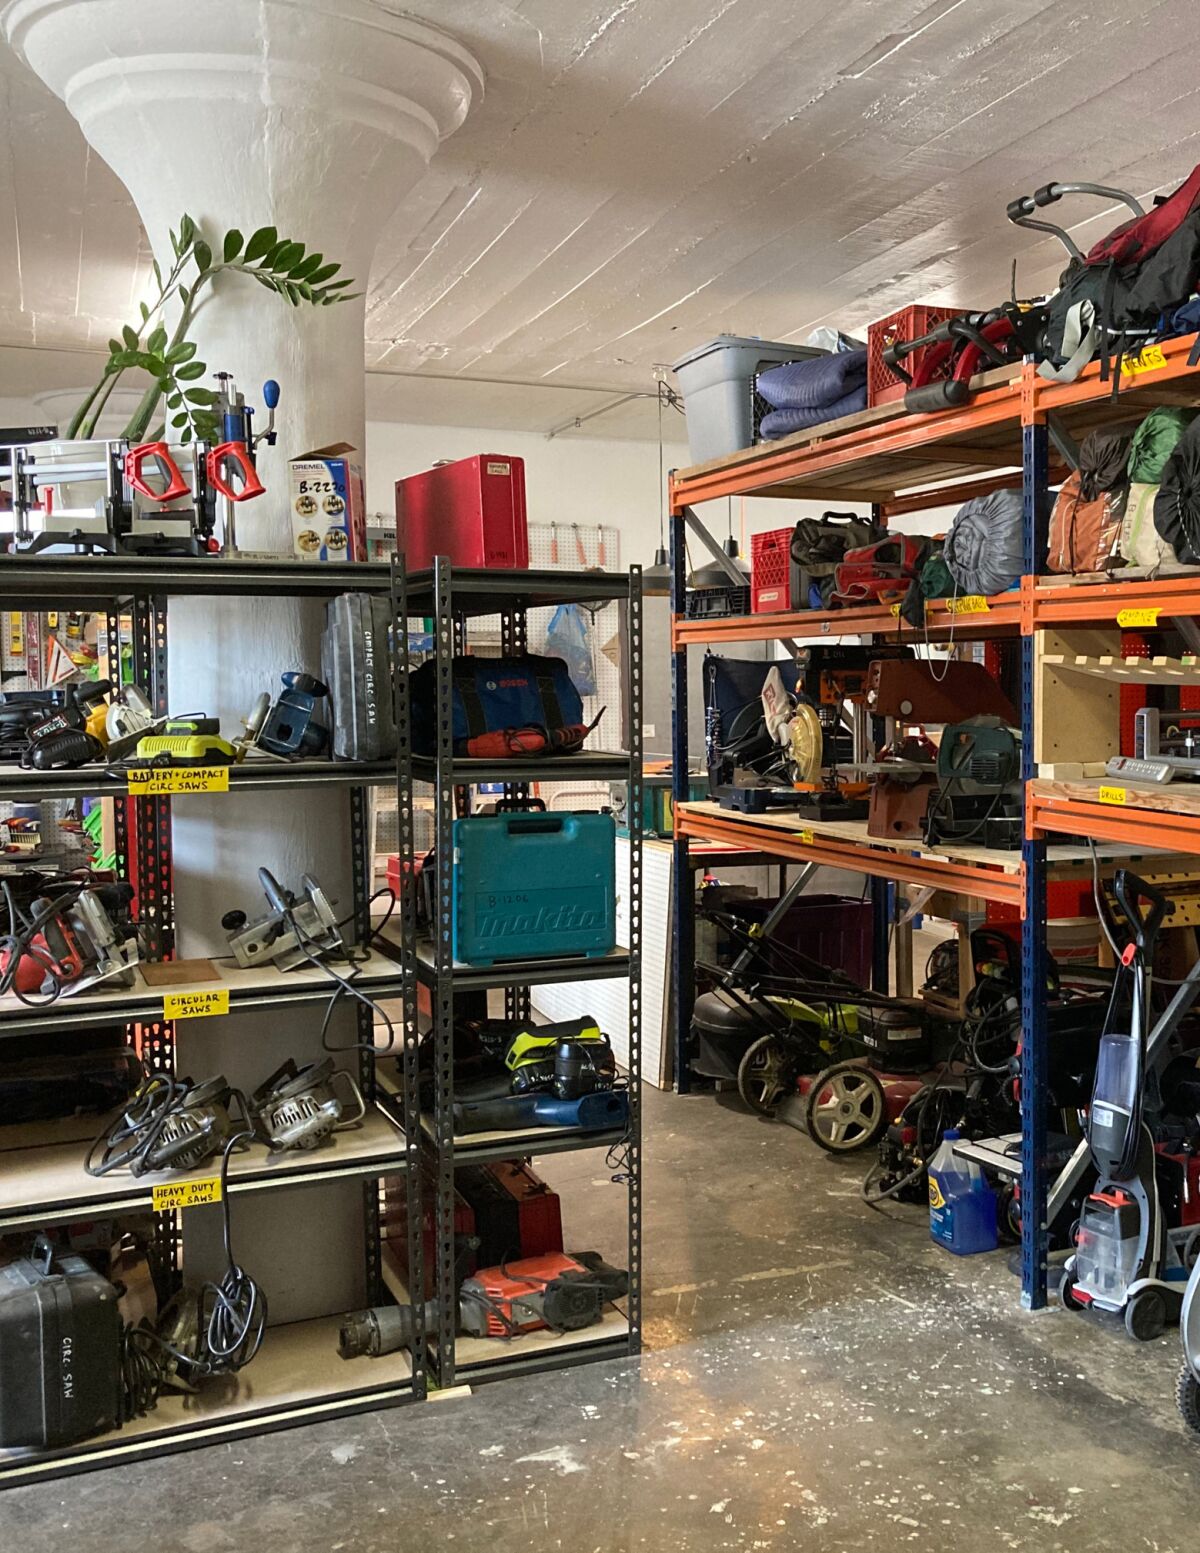 Shelves are full of items available for loan inside the Chicago Tool Library on Chicago's South Side.